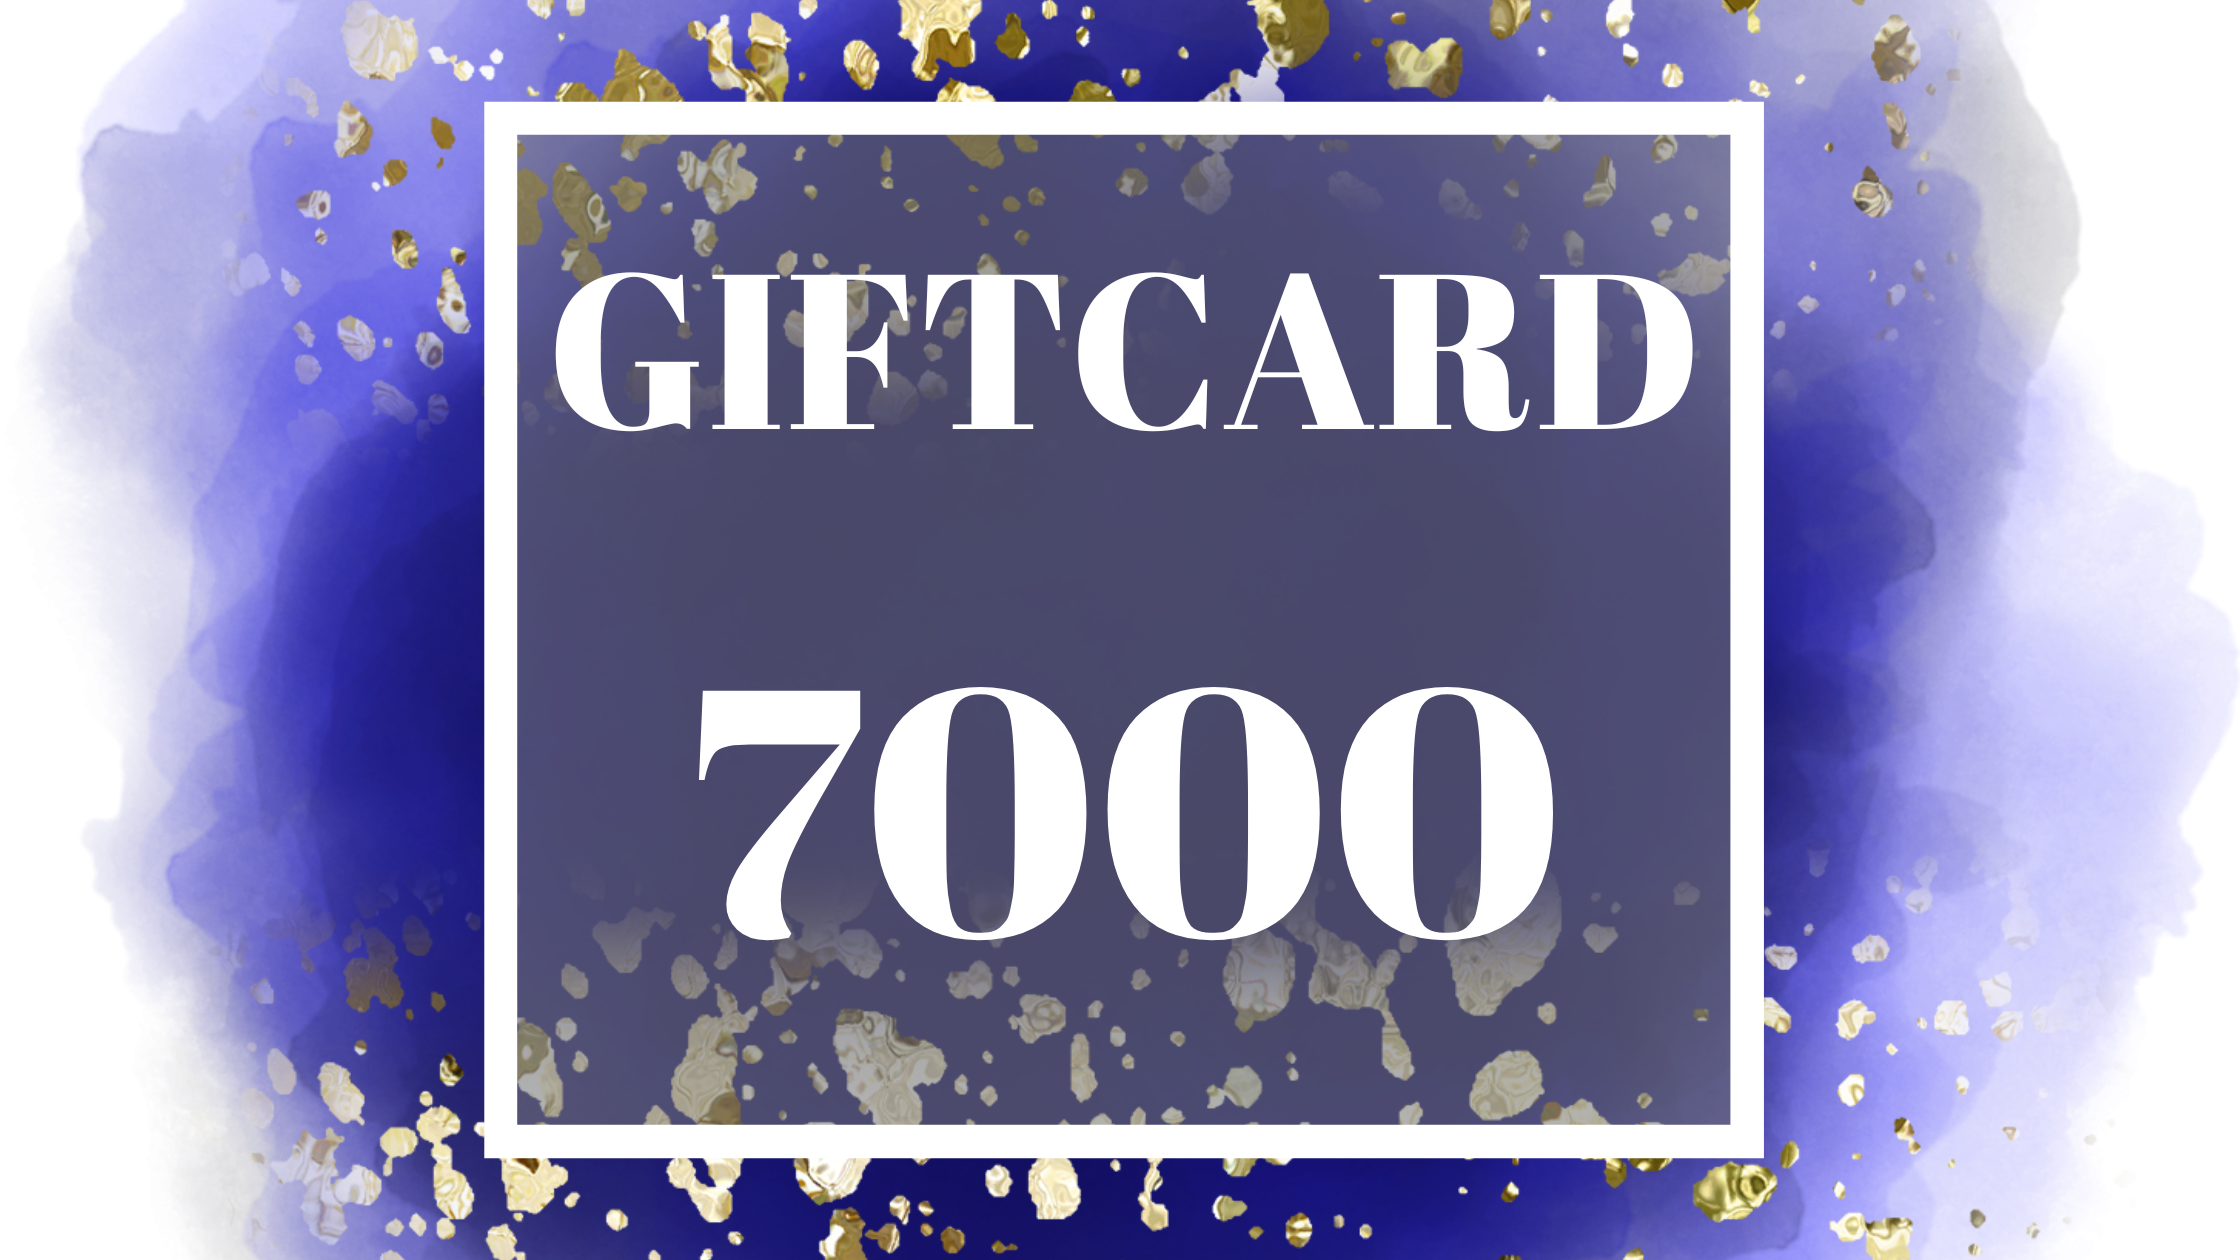 GIFTCARD7000